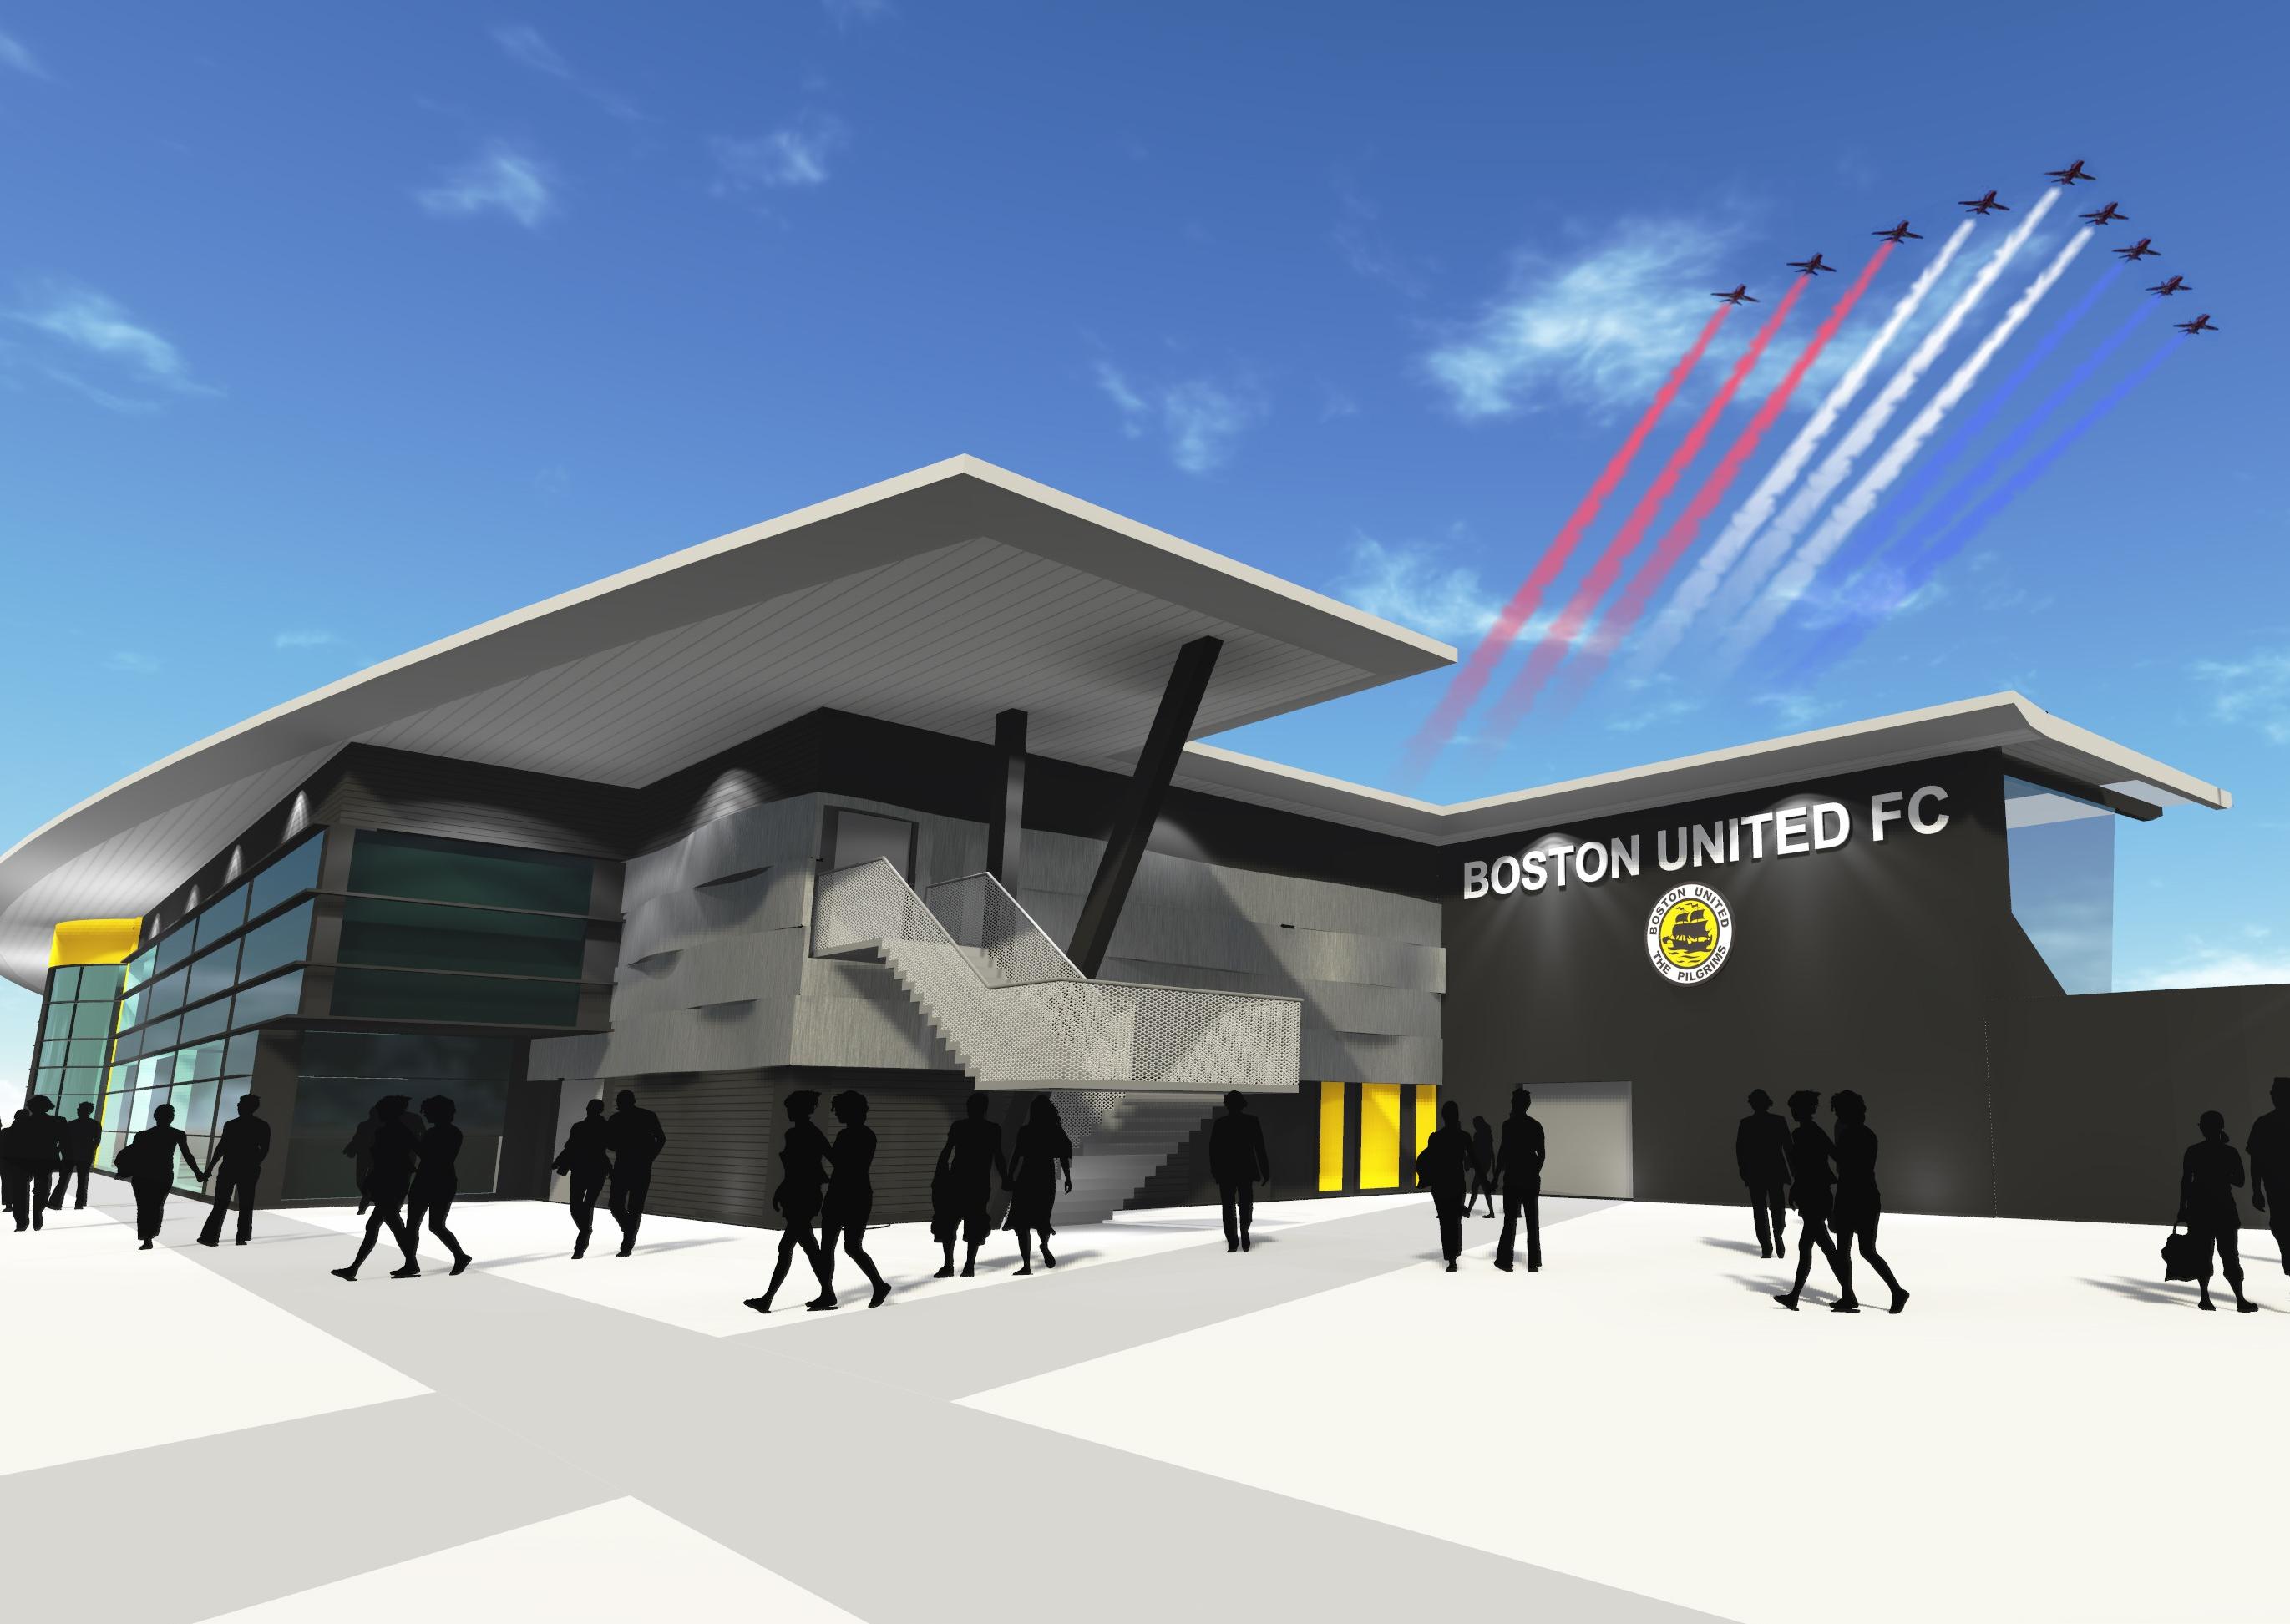 Plans for a new stadium for Boston United were given the green light in 2014 after a four-and-a-half hour debate and hearing.